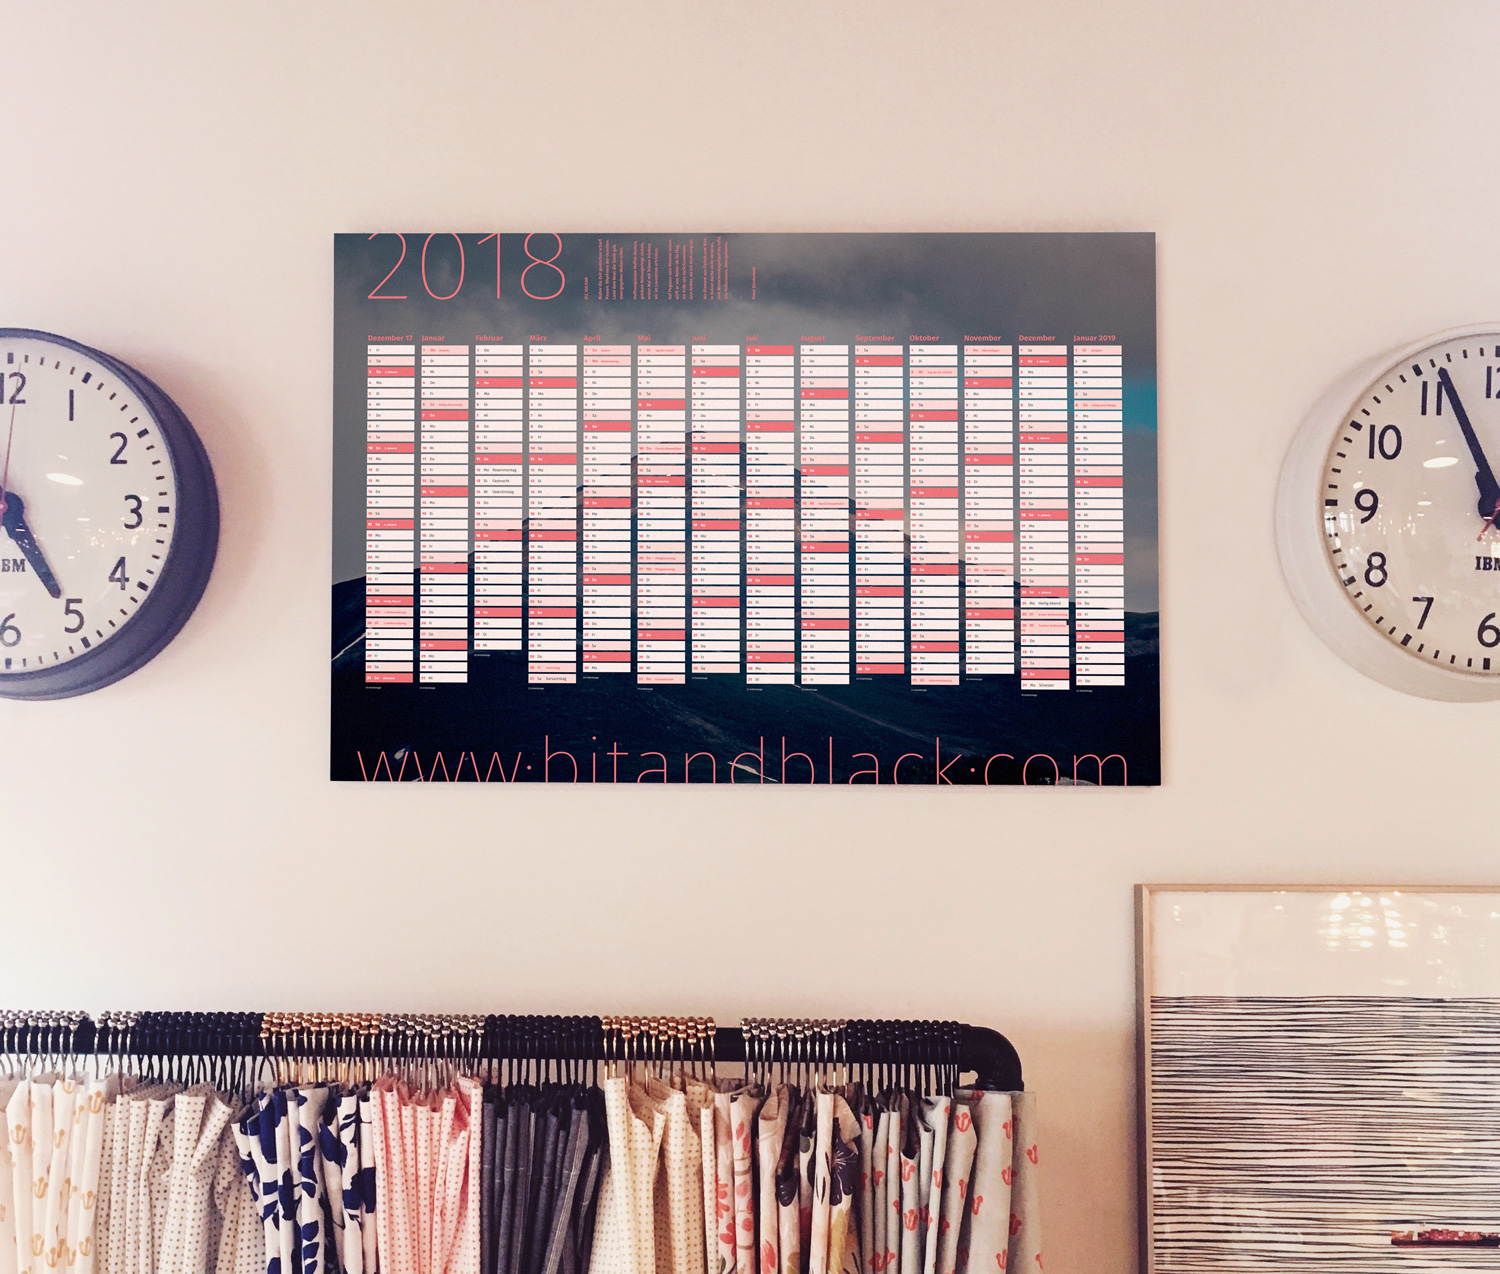 All-year wall calendar in German language. It has been set in five colours in Fira Sans and includes day digits and names, the names of German holidays and the number of working days per month